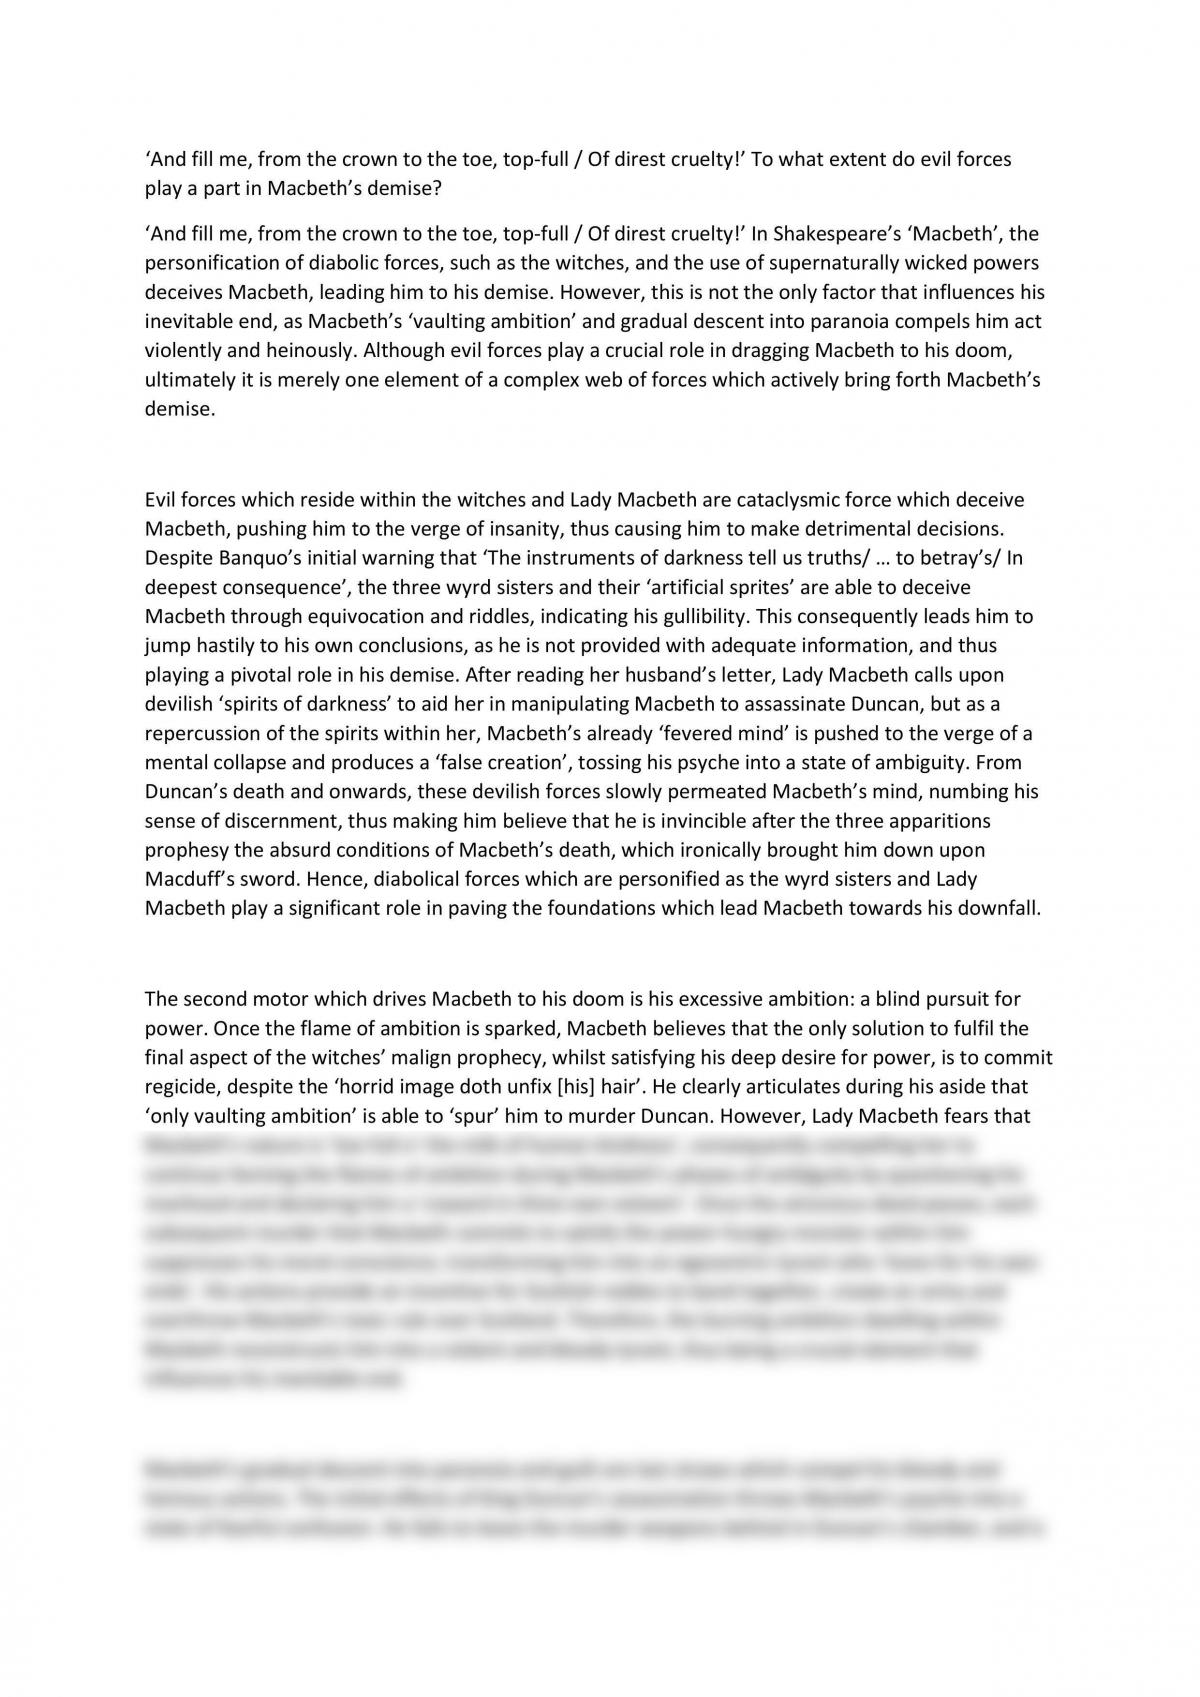 Essay Discussing Extent of Evil Forces Contributing to Macbeth's Demise - Page 1